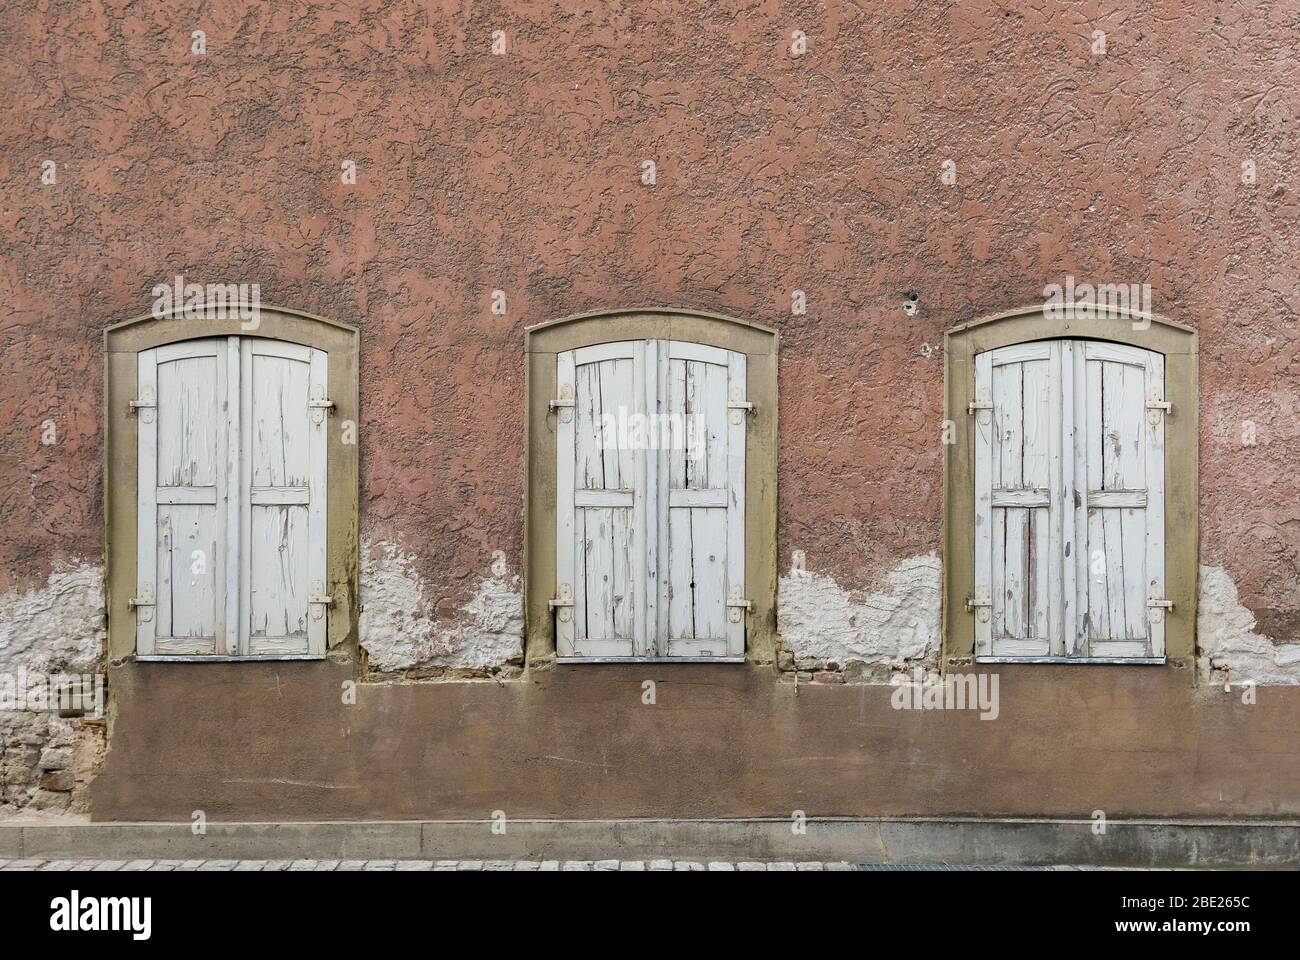 Symmetrical facade of abandoned, dilapidated house with 3 windows with shutters Stock Photo